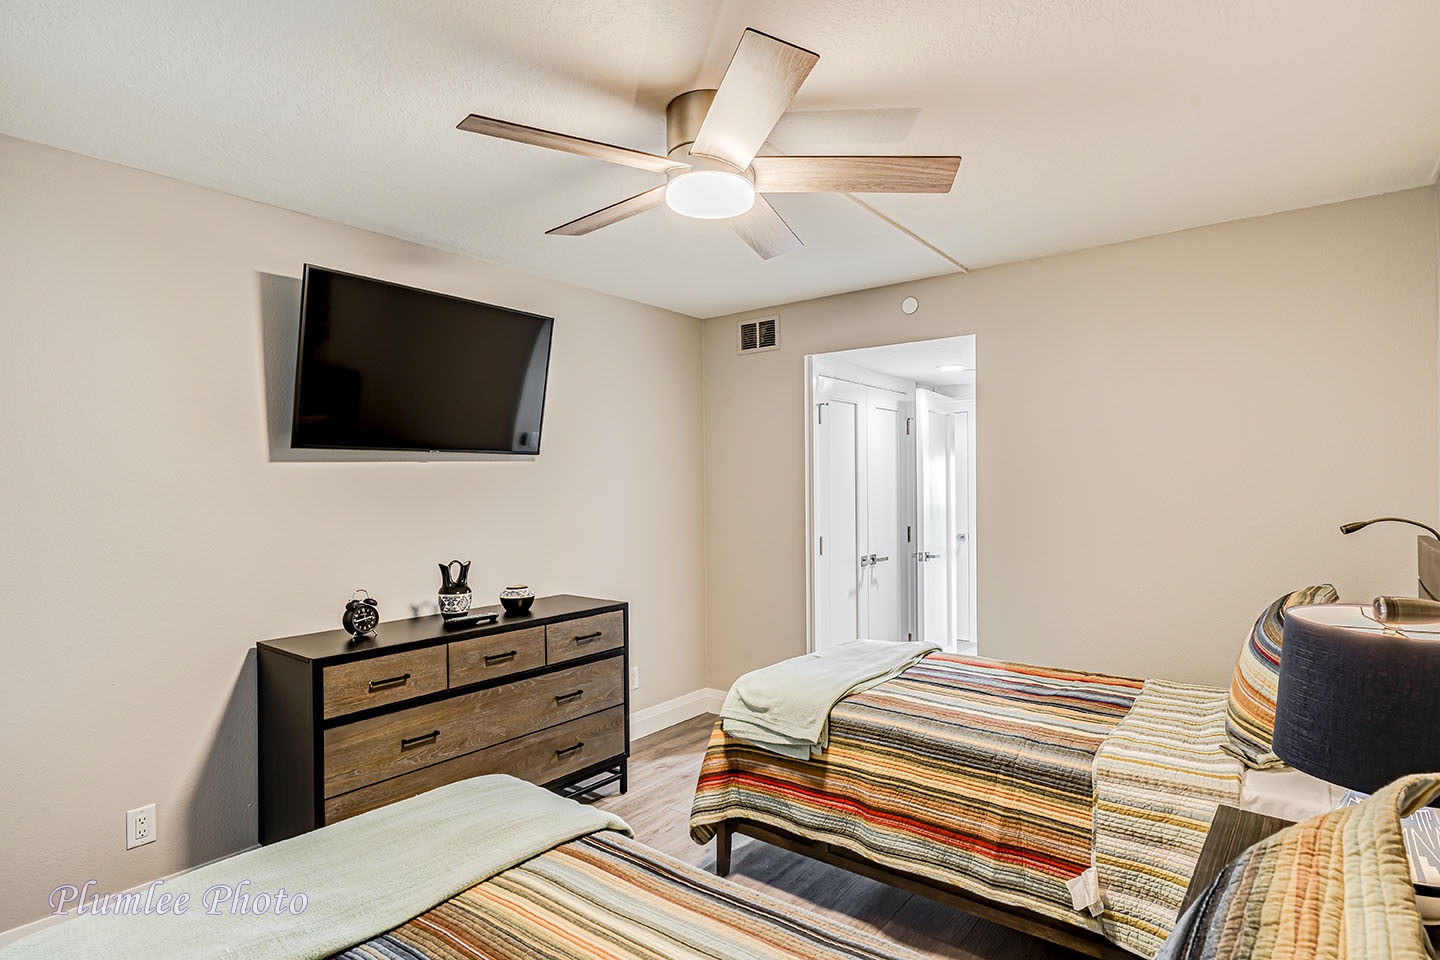 3rd bedroom has a mounted TV and ceiling fan.